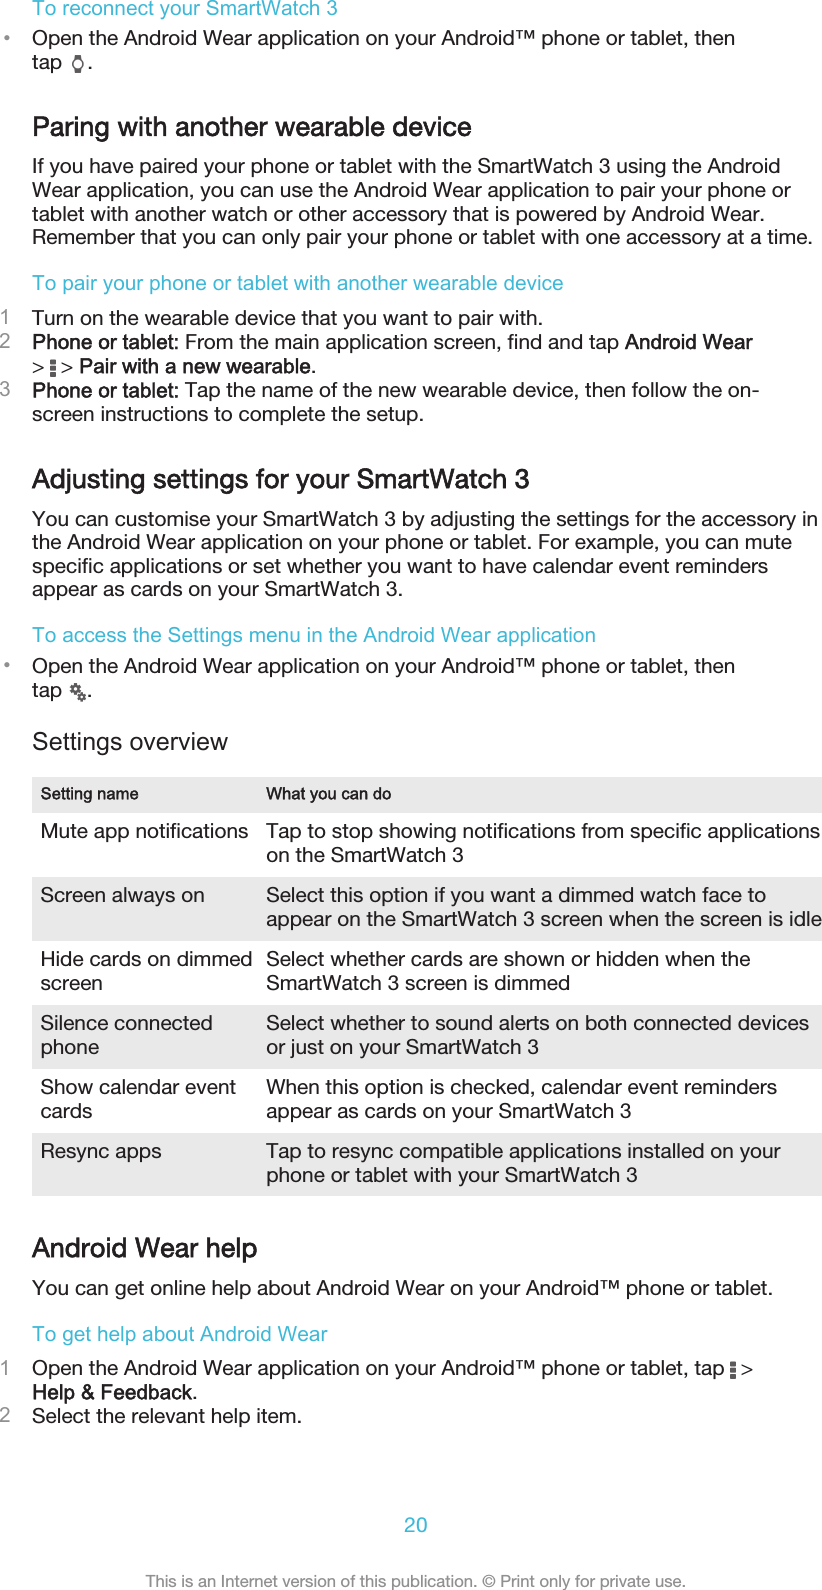 To reconnect your SmartWatch 3•Open the Android Wear application on your Android™ phone or tablet, thentap  .Paring with another wearable deviceIf you have paired your phone or tablet with the SmartWatch 3 using the AndroidWear application, you can use the Android Wear application to pair your phone ortablet with another watch or other accessory that is powered by Android Wear.Remember that you can only pair your phone or tablet with one accessory at a time.To pair your phone or tablet with another wearable device1Turn on the wearable device that you want to pair with.2Phone or tablet: From the main application screen, find and tap Android Wear&gt;   &gt; Pair with a new wearable.3Phone or tablet: Tap the name of the new wearable device, then follow the on-screen instructions to complete the setup.Adjusting settings for your SmartWatch 3You can customise your SmartWatch 3 by adjusting the settings for the accessory inthe Android Wear application on your phone or tablet. For example, you can mutespecific applications or set whether you want to have calendar event remindersappear as cards on your SmartWatch 3.To access the Settings menu in the Android Wear application•Open the Android Wear application on your Android™ phone or tablet, thentap  .Settings overviewSetting name What you can doMute app notifications Tap to stop showing notifications from specific applicationson the SmartWatch 3Screen always on Select this option if you want a dimmed watch face toappear on the SmartWatch 3 screen when the screen is idleHide cards on dimmedscreen Select whether cards are shown or hidden when theSmartWatch 3 screen is dimmedSilence connectedphone Select whether to sound alerts on both connected devicesor just on your SmartWatch 3Show calendar eventcards When this option is checked, calendar event remindersappear as cards on your SmartWatch 3Resync apps Tap to resync compatible applications installed on yourphone or tablet with your SmartWatch 3Android Wear helpYou can get online help about Android Wear on your Android™ phone or tablet.To get help about Android Wear1Open the Android Wear application on your Android™ phone or tablet, tap   &gt;Help &amp; Feedback.2Select the relevant help item.20This is an Internet version of this publication. © Print only for private use.